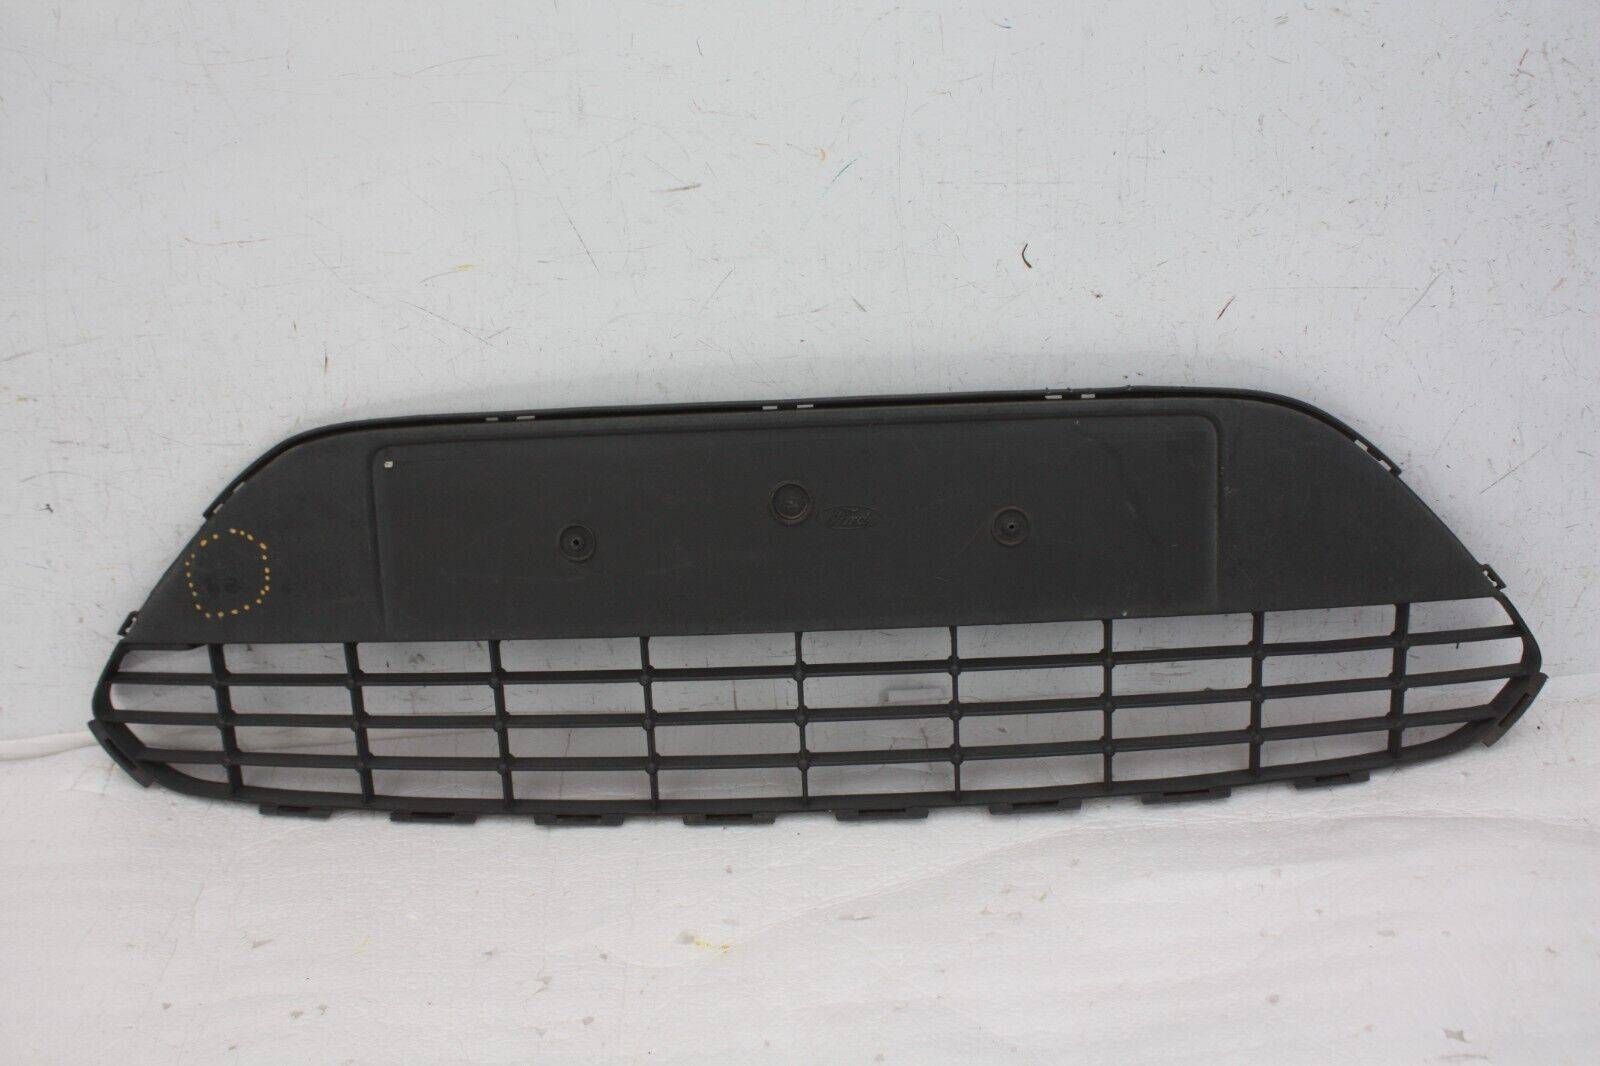 Ford Focus Front Bumper Grill 2008 TO 2011 8M51 17B968 BE Genuine DAMAGED 176410989719